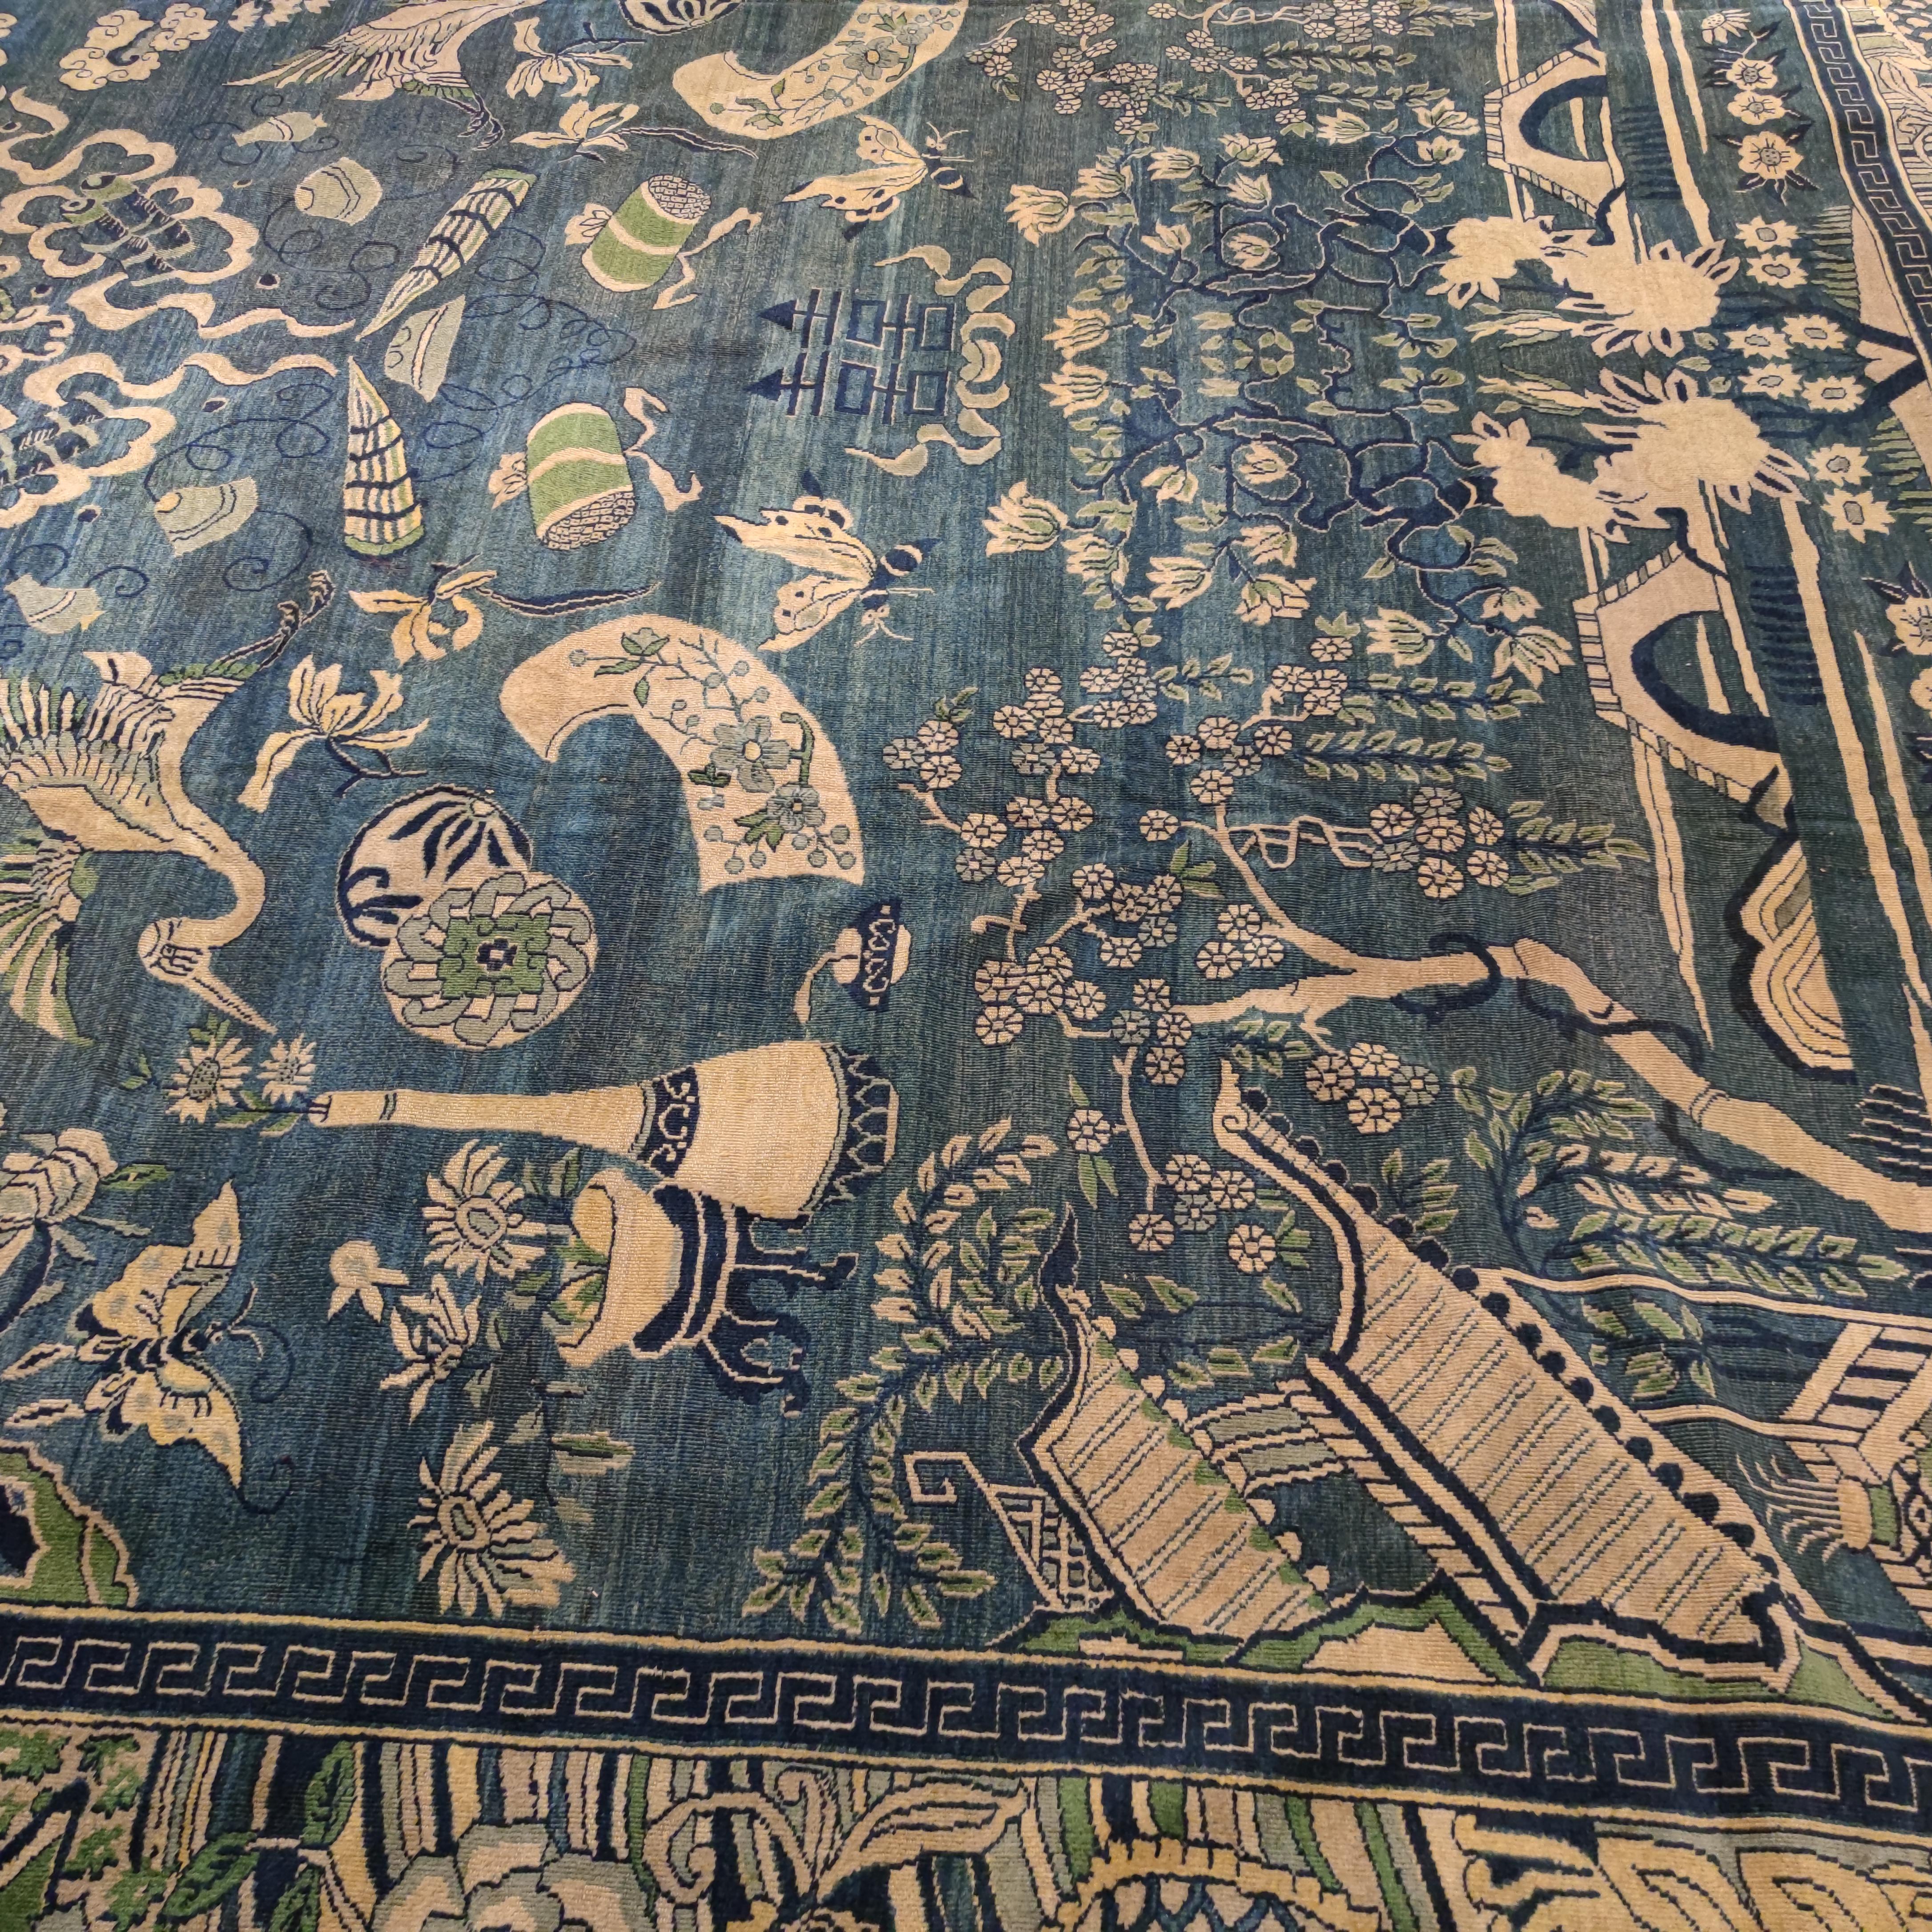 A specific cluster of northern Indian rugs are inspired by antique Chinese weavings, and are often referred to as Indochine. Here the light blue background hosts a very rich flora and fauna, punctuated by Chinese symbols of longevity. A truly